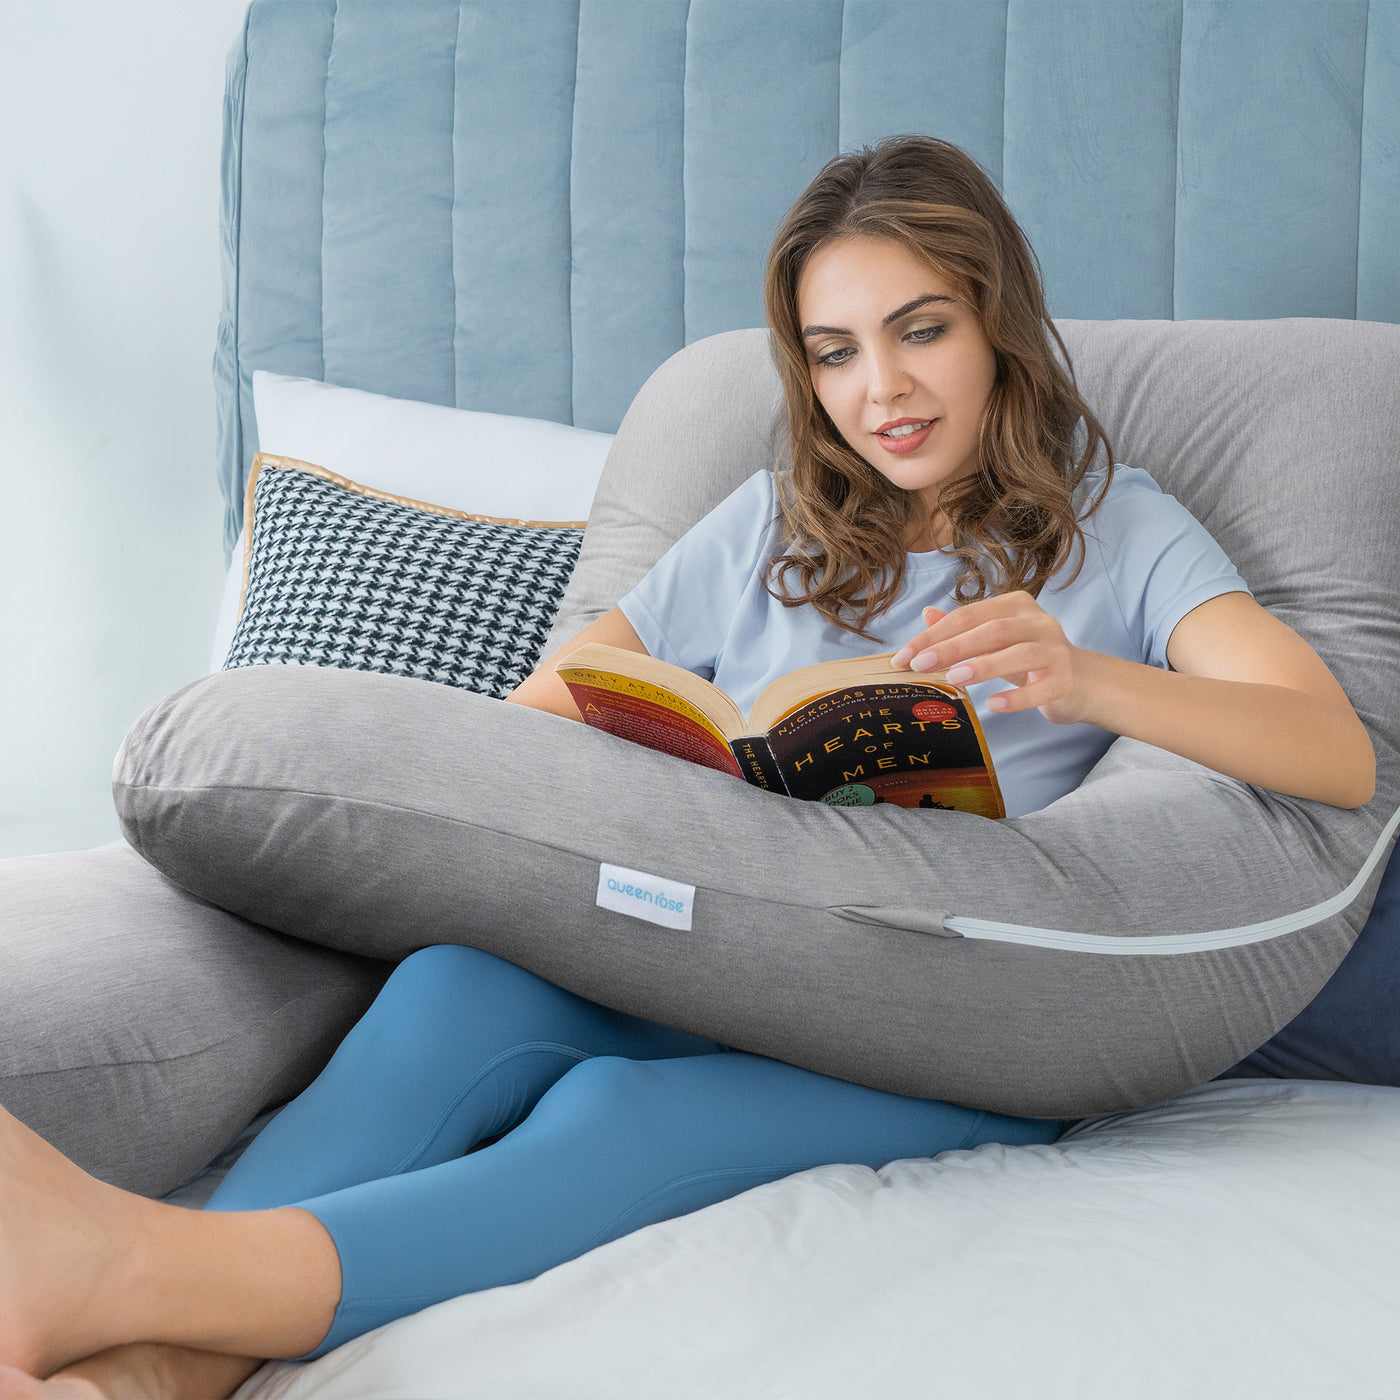 55" Clasical U-shaped Pregnancy Pillow (Cooling Silky Gray)